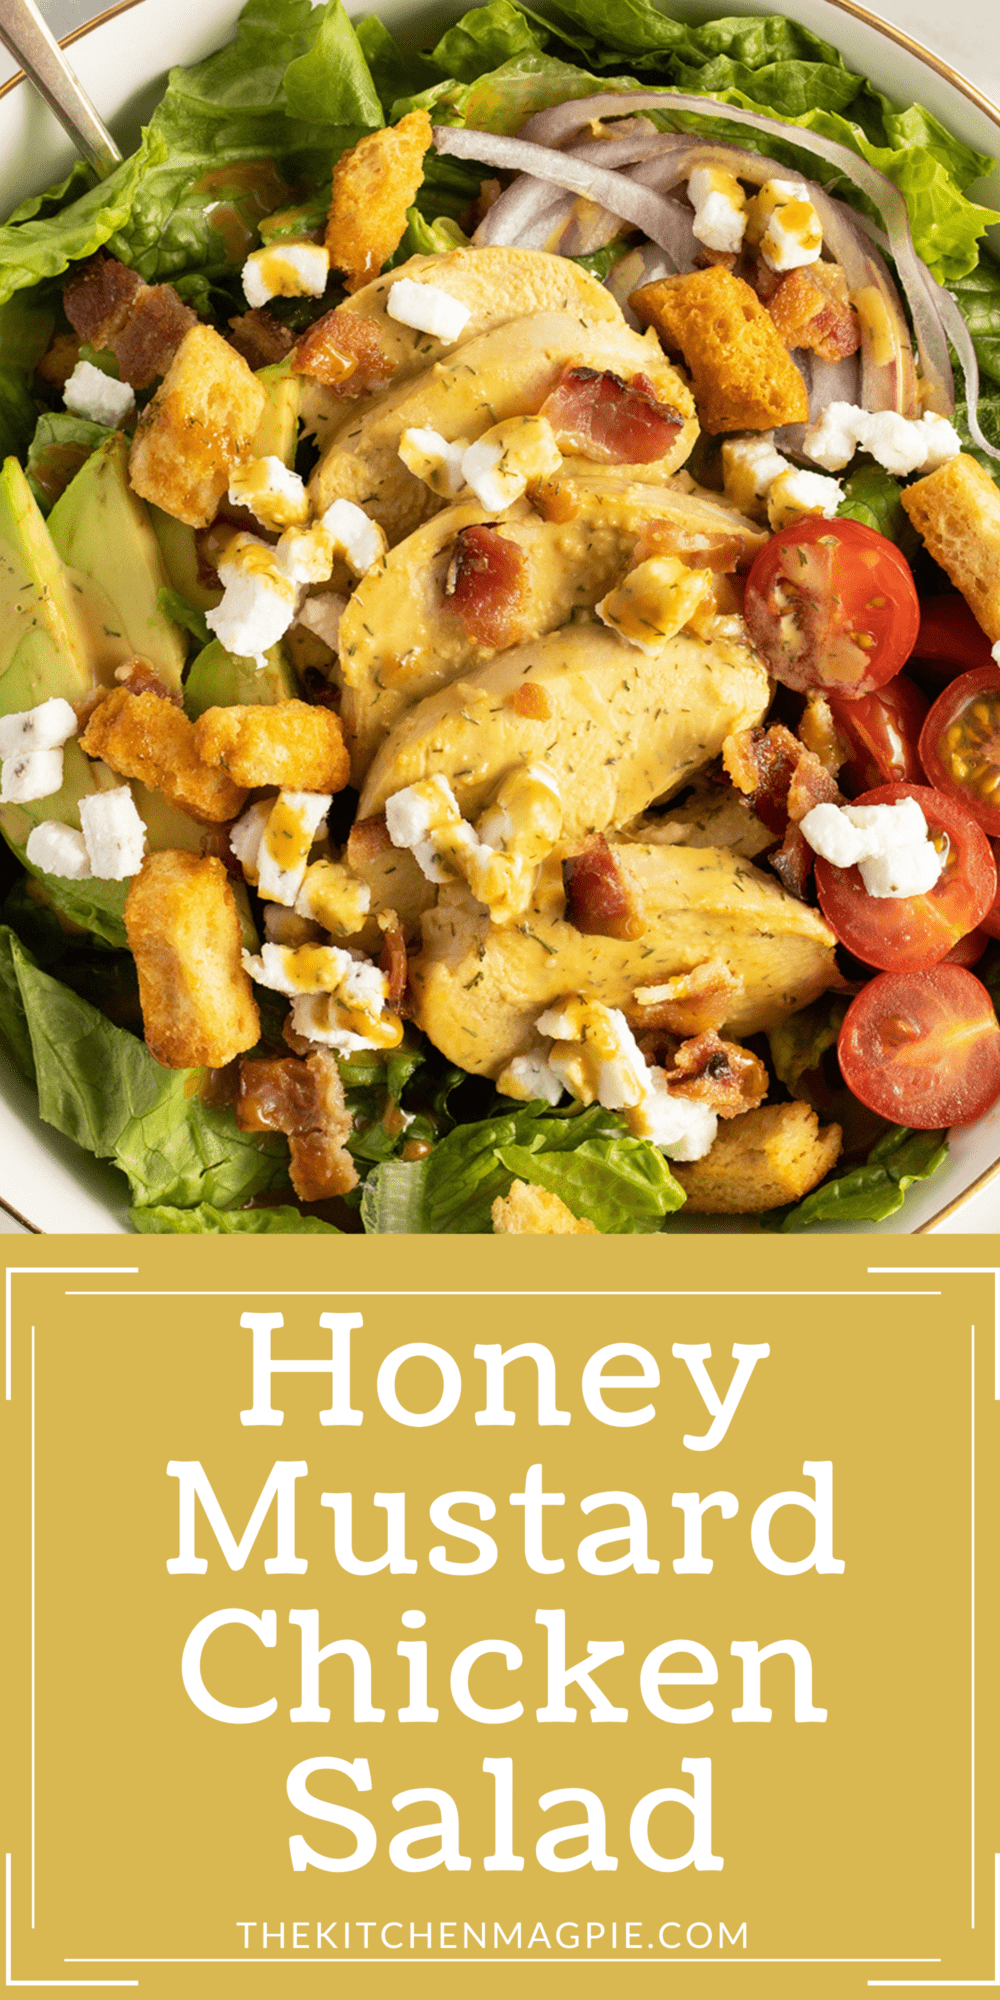 With this delicious honey mustard chicken salad recipe, you can add a healthy and delicious salad to your dinner rotation.